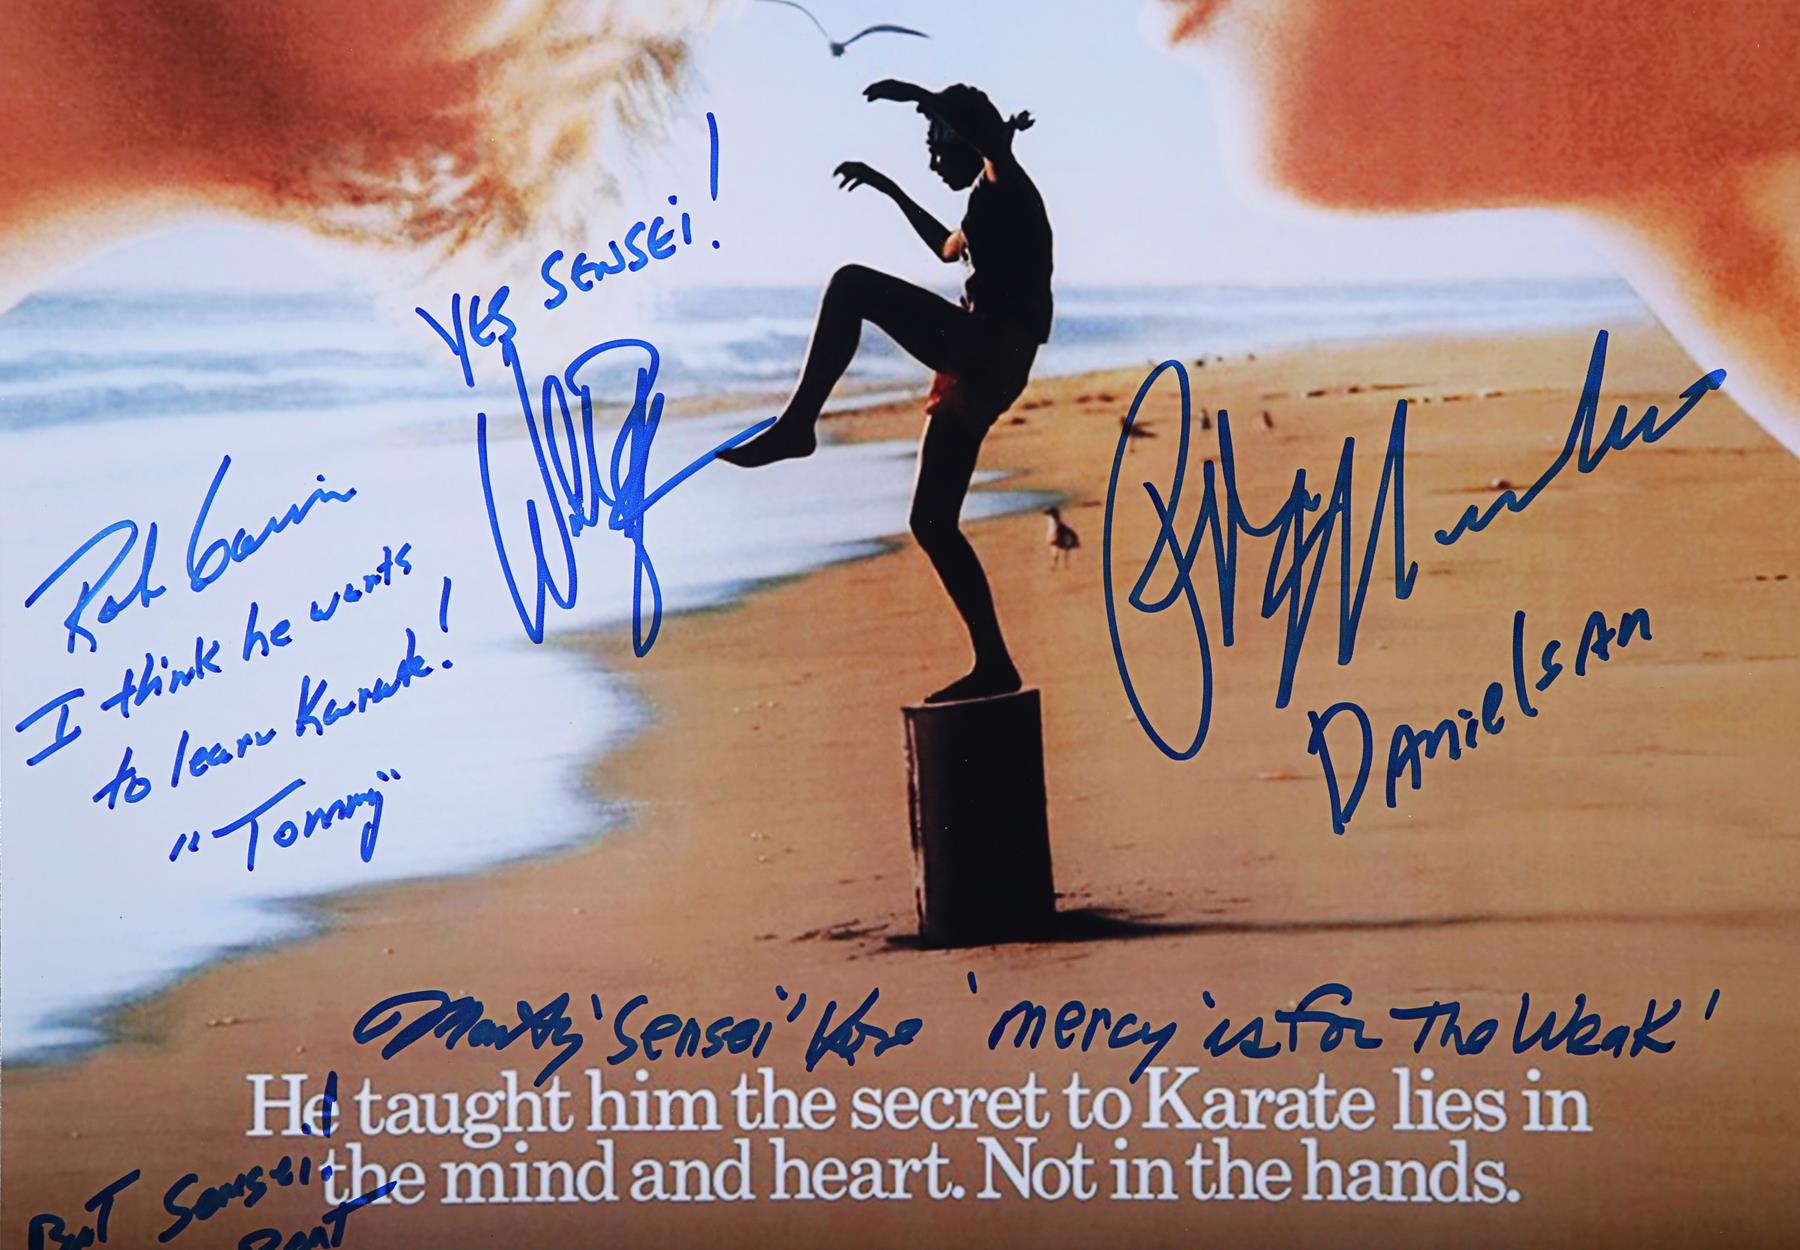 THE KARATE KID (1984) - Poster, 1980's, Autographed by Ralph Macchio, William Zabka and Others - Image 2 of 5